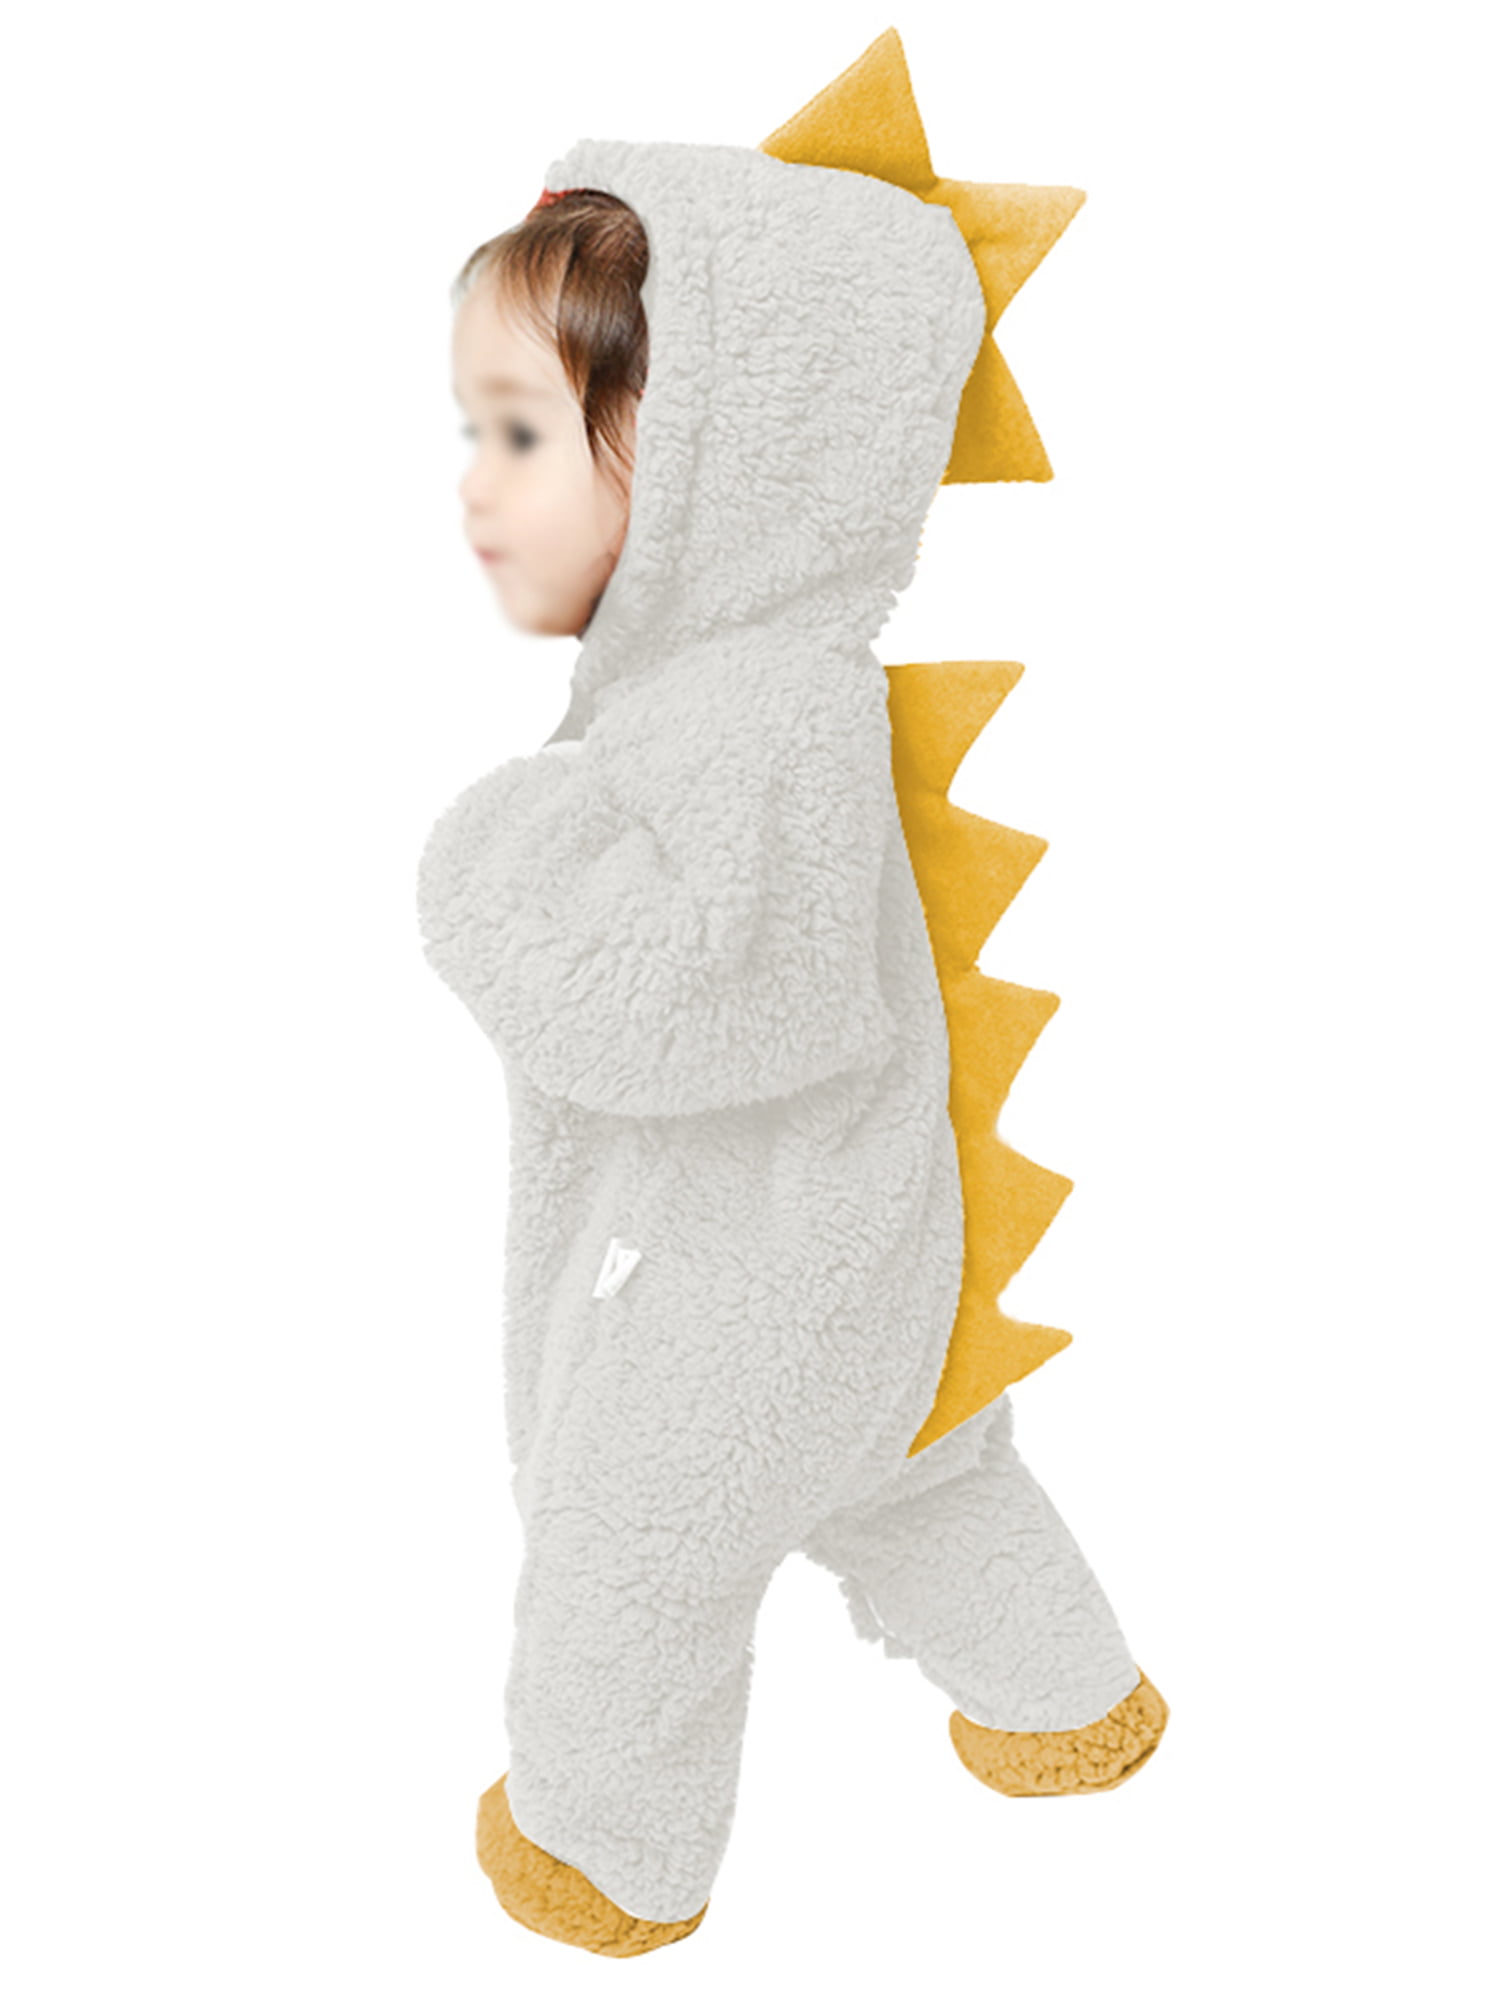 POTO Infant Baby Short Sleeve Solid Dinosaur Hooded Jumpsuit Romper Playsuit Summer Clothes Outfits 